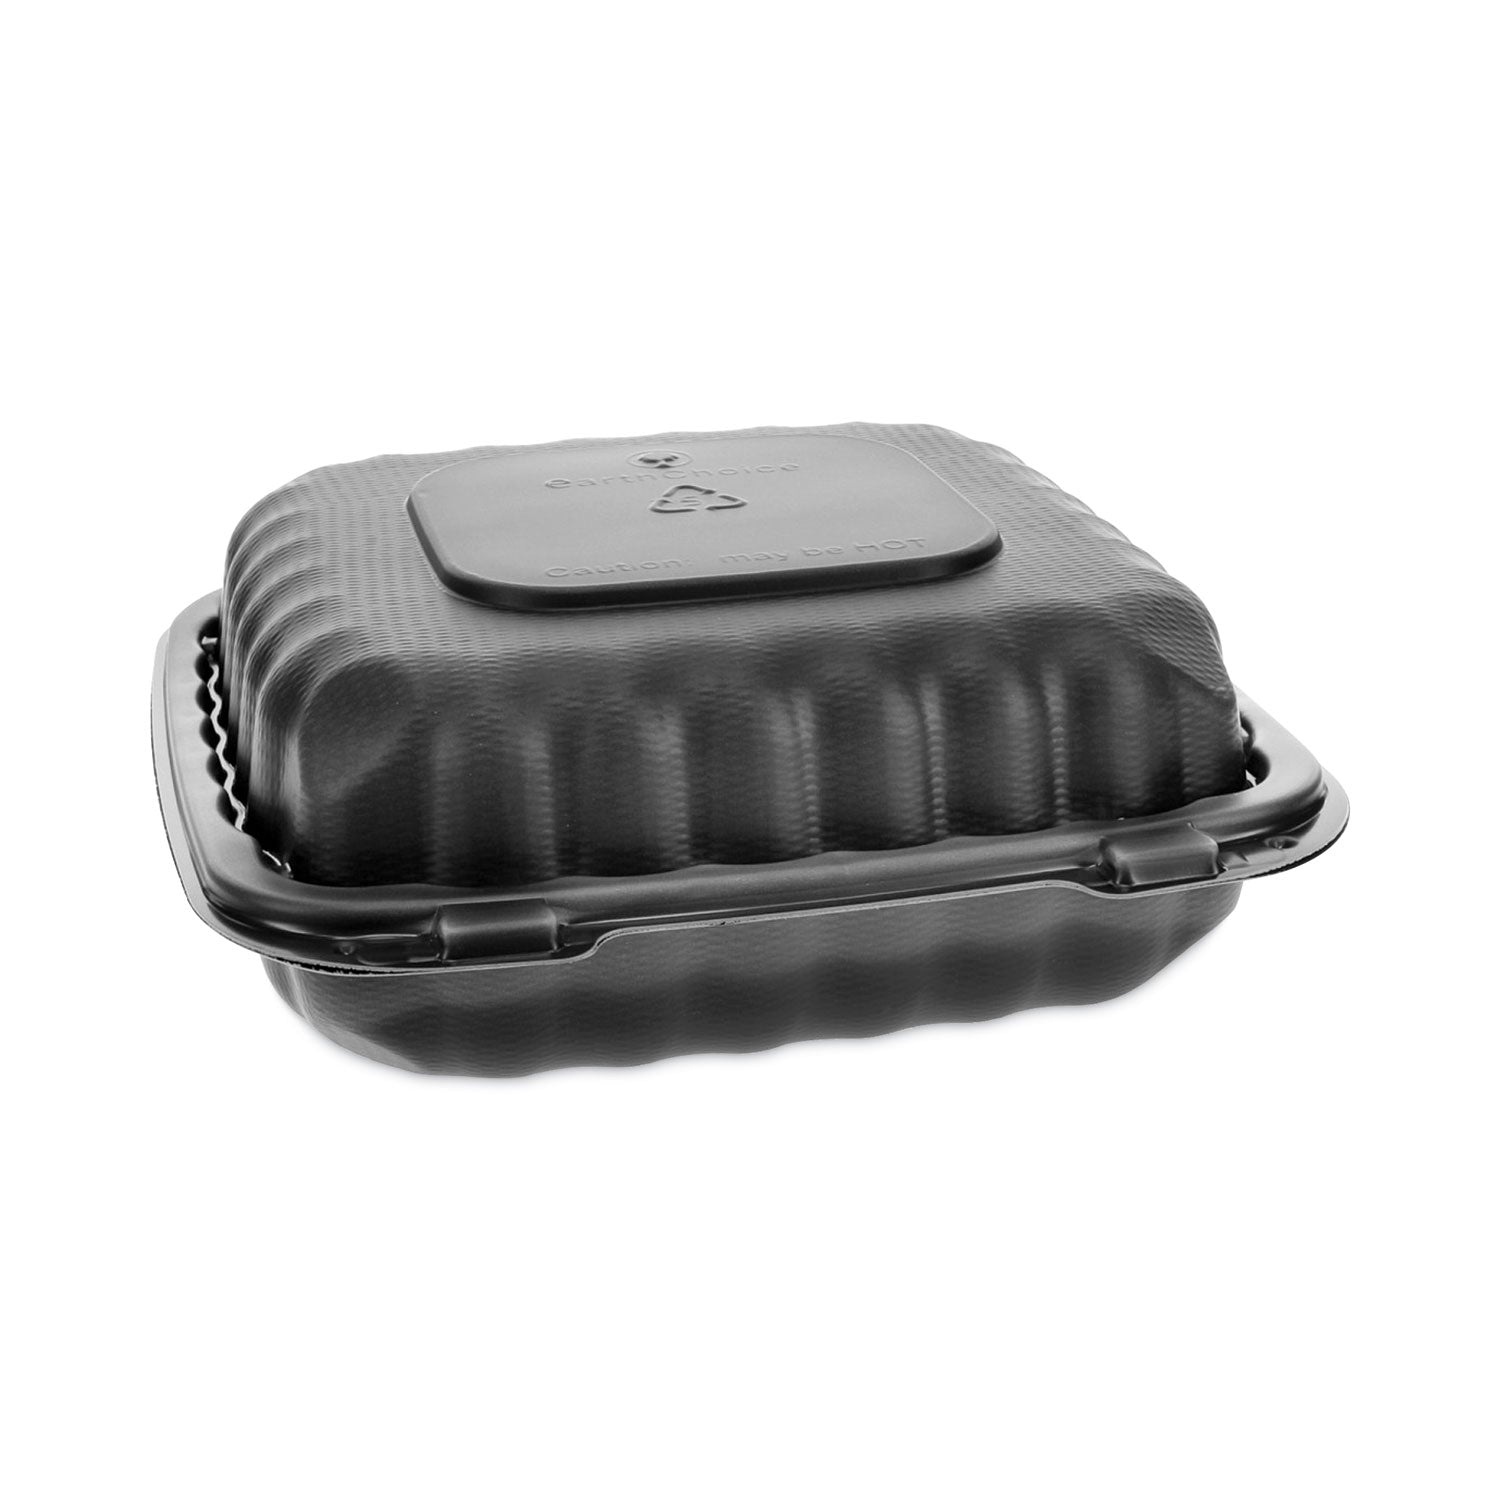 earthchoice-smartlock-microwavable-mfpp-hinged-lid-container-831-x-835-x-31-black-plastic-200-carton_pctycnb08010000 - 1